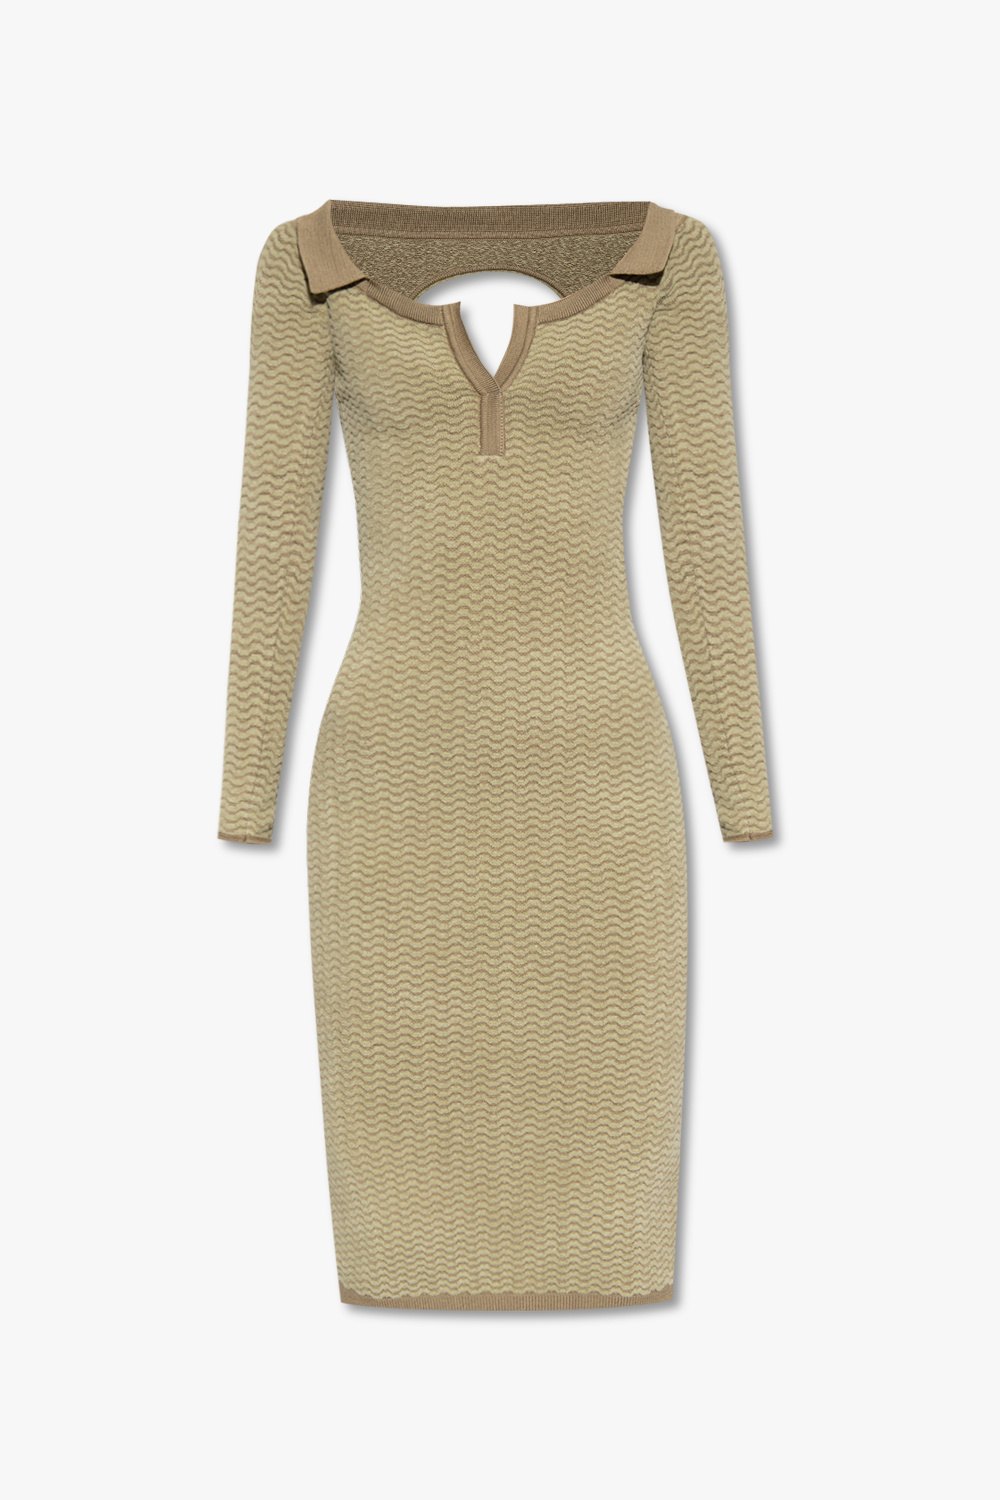 Jacquemus ‘Pampero’ cut-out dress